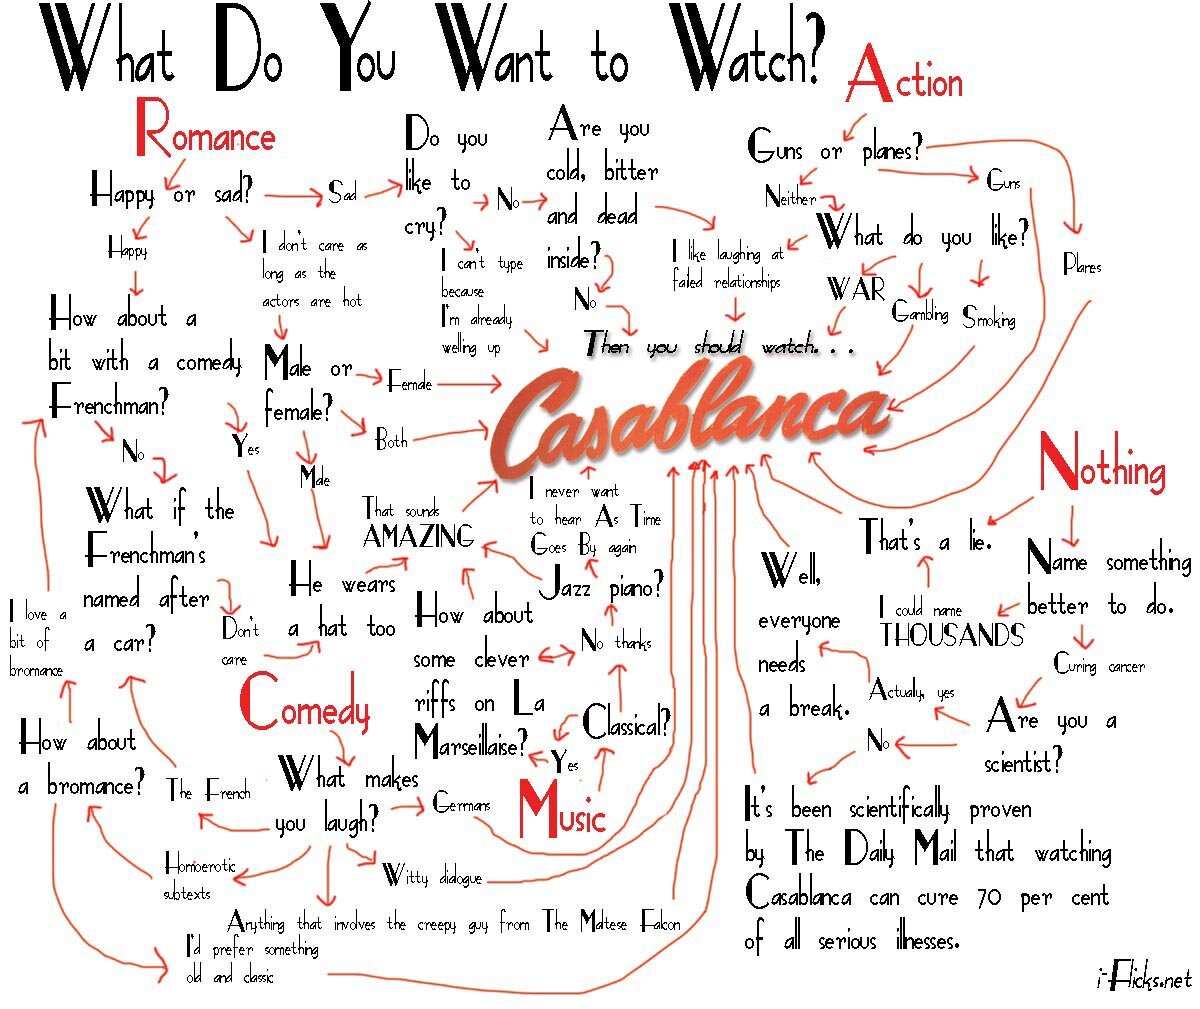 Casablanca Flow-chart: The greatest movie ever made